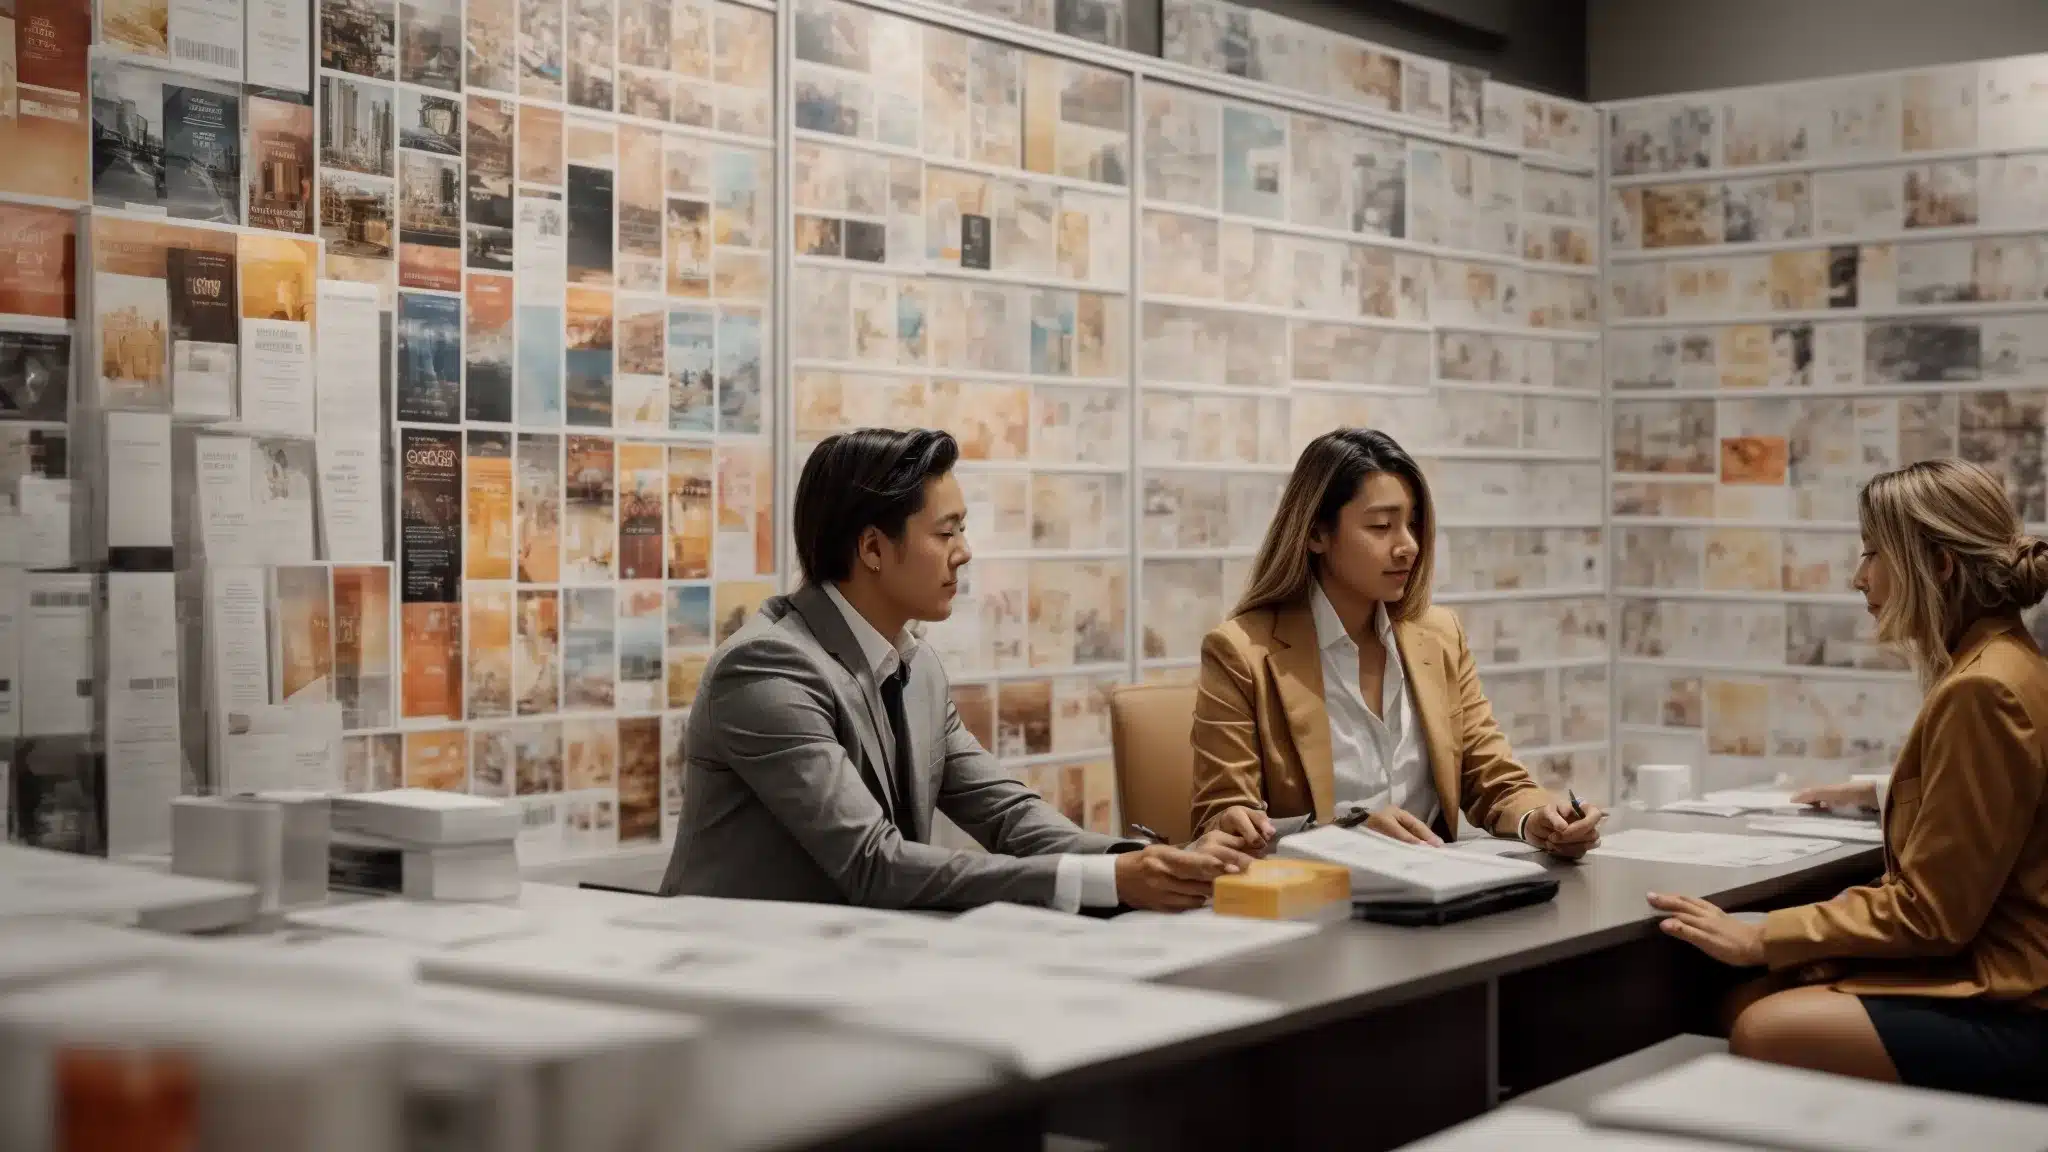 A Strategic Marketing Team Analyzes A Wall Covered In Various Product Packaging Designs During A Competitive Brand Review Meeting.